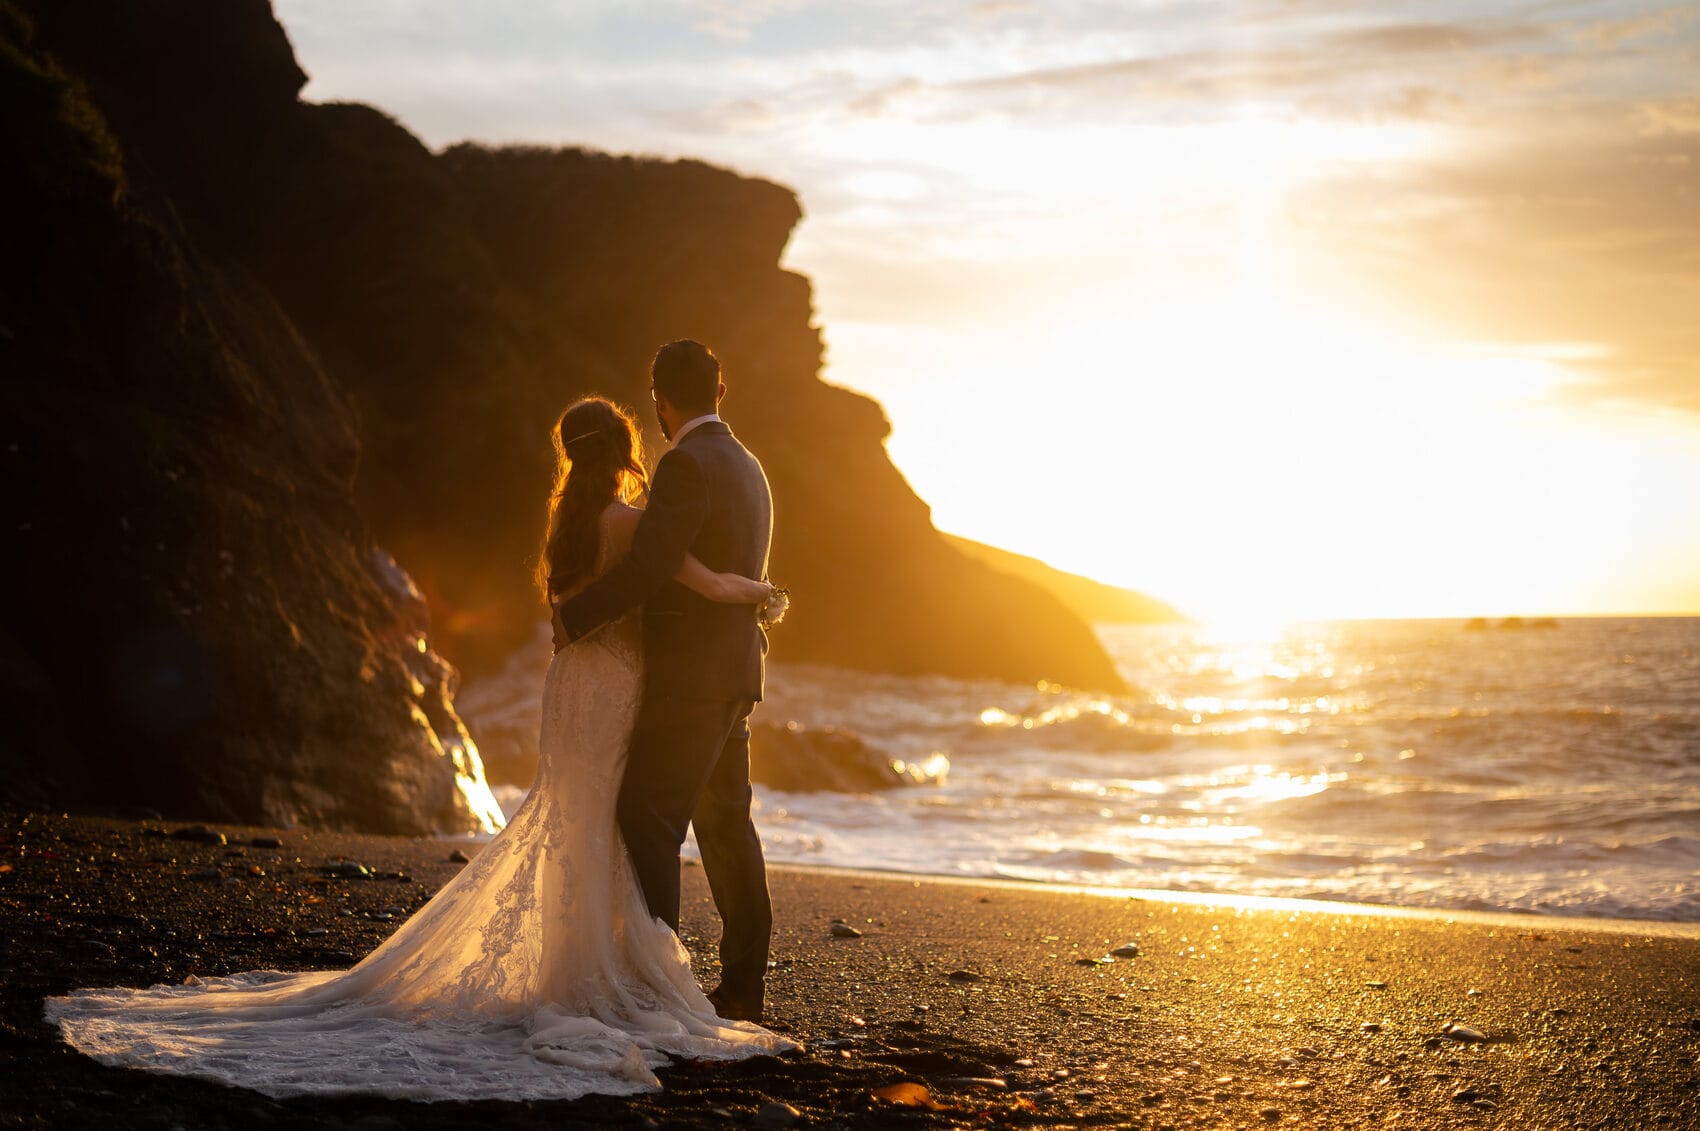 Sun setting on the bride and groom at Tunnels Beaches Wedding venue